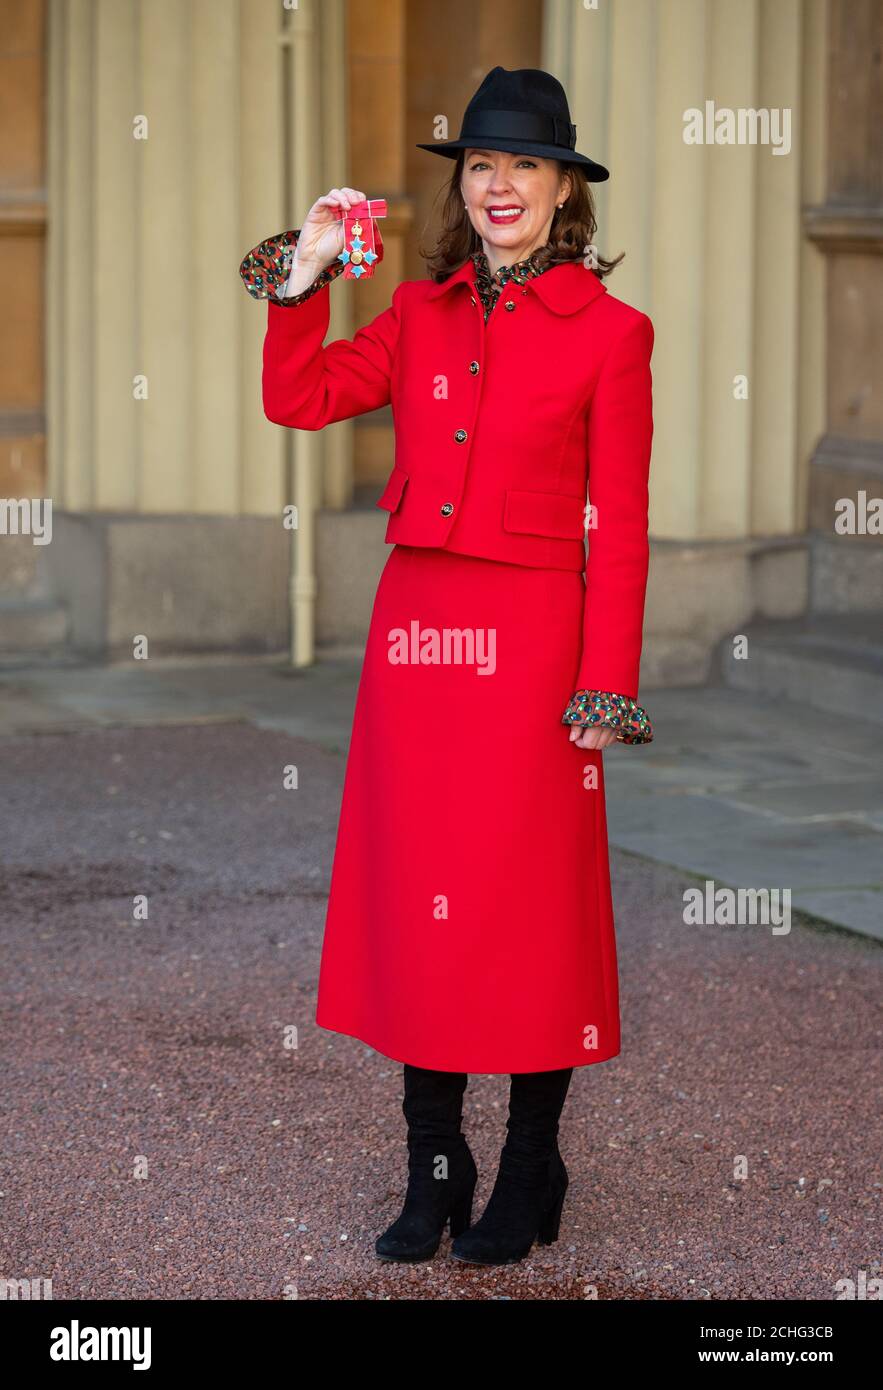 Former Downing Street Joint Chief of Staff Fiona Hill with her Commander of the Order of the British Empire (CBE) medal, following an Investiture ceremony at Buckingham Palace, London. Stock Photo